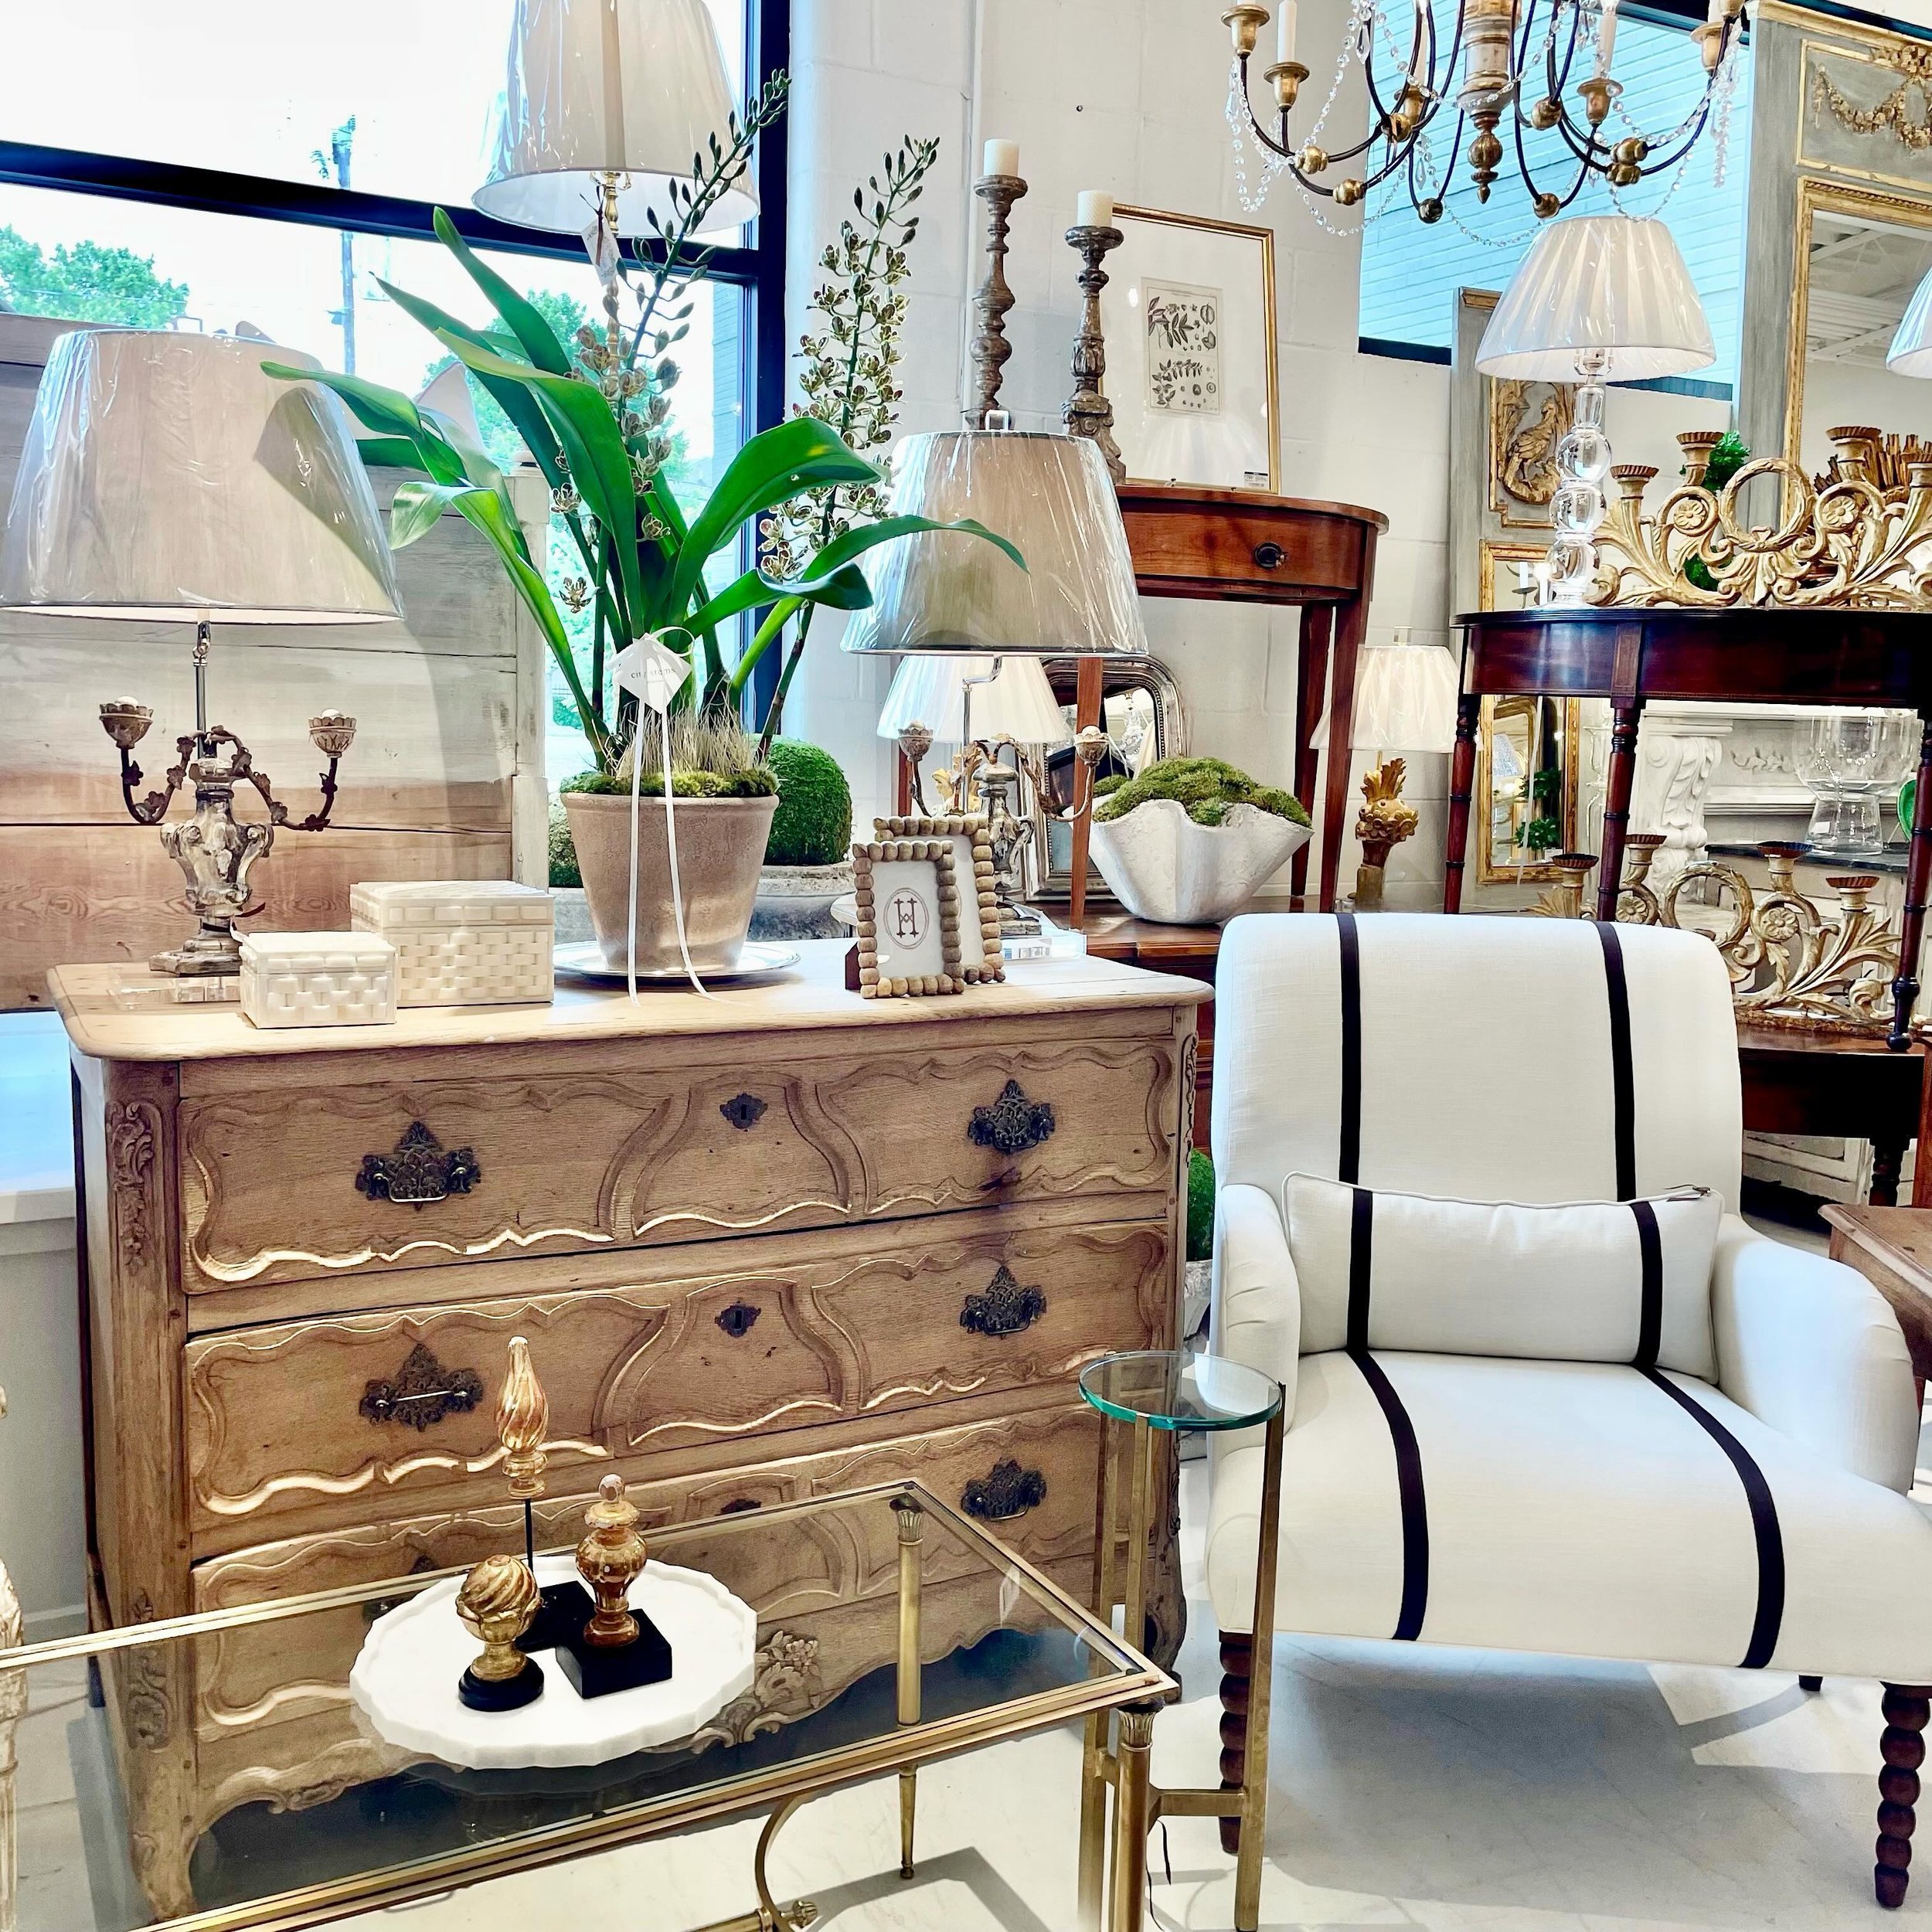 Happy Friday! Stop in and shop with us this weekend. We&rsquo;ve had lots of new arrivals this week! #heritageclt #curateddecor #europeanantiques #italianantiques #englishantiques #frenchantiques #antiquedecor #antiquedealersofinstagram #antiquepatin